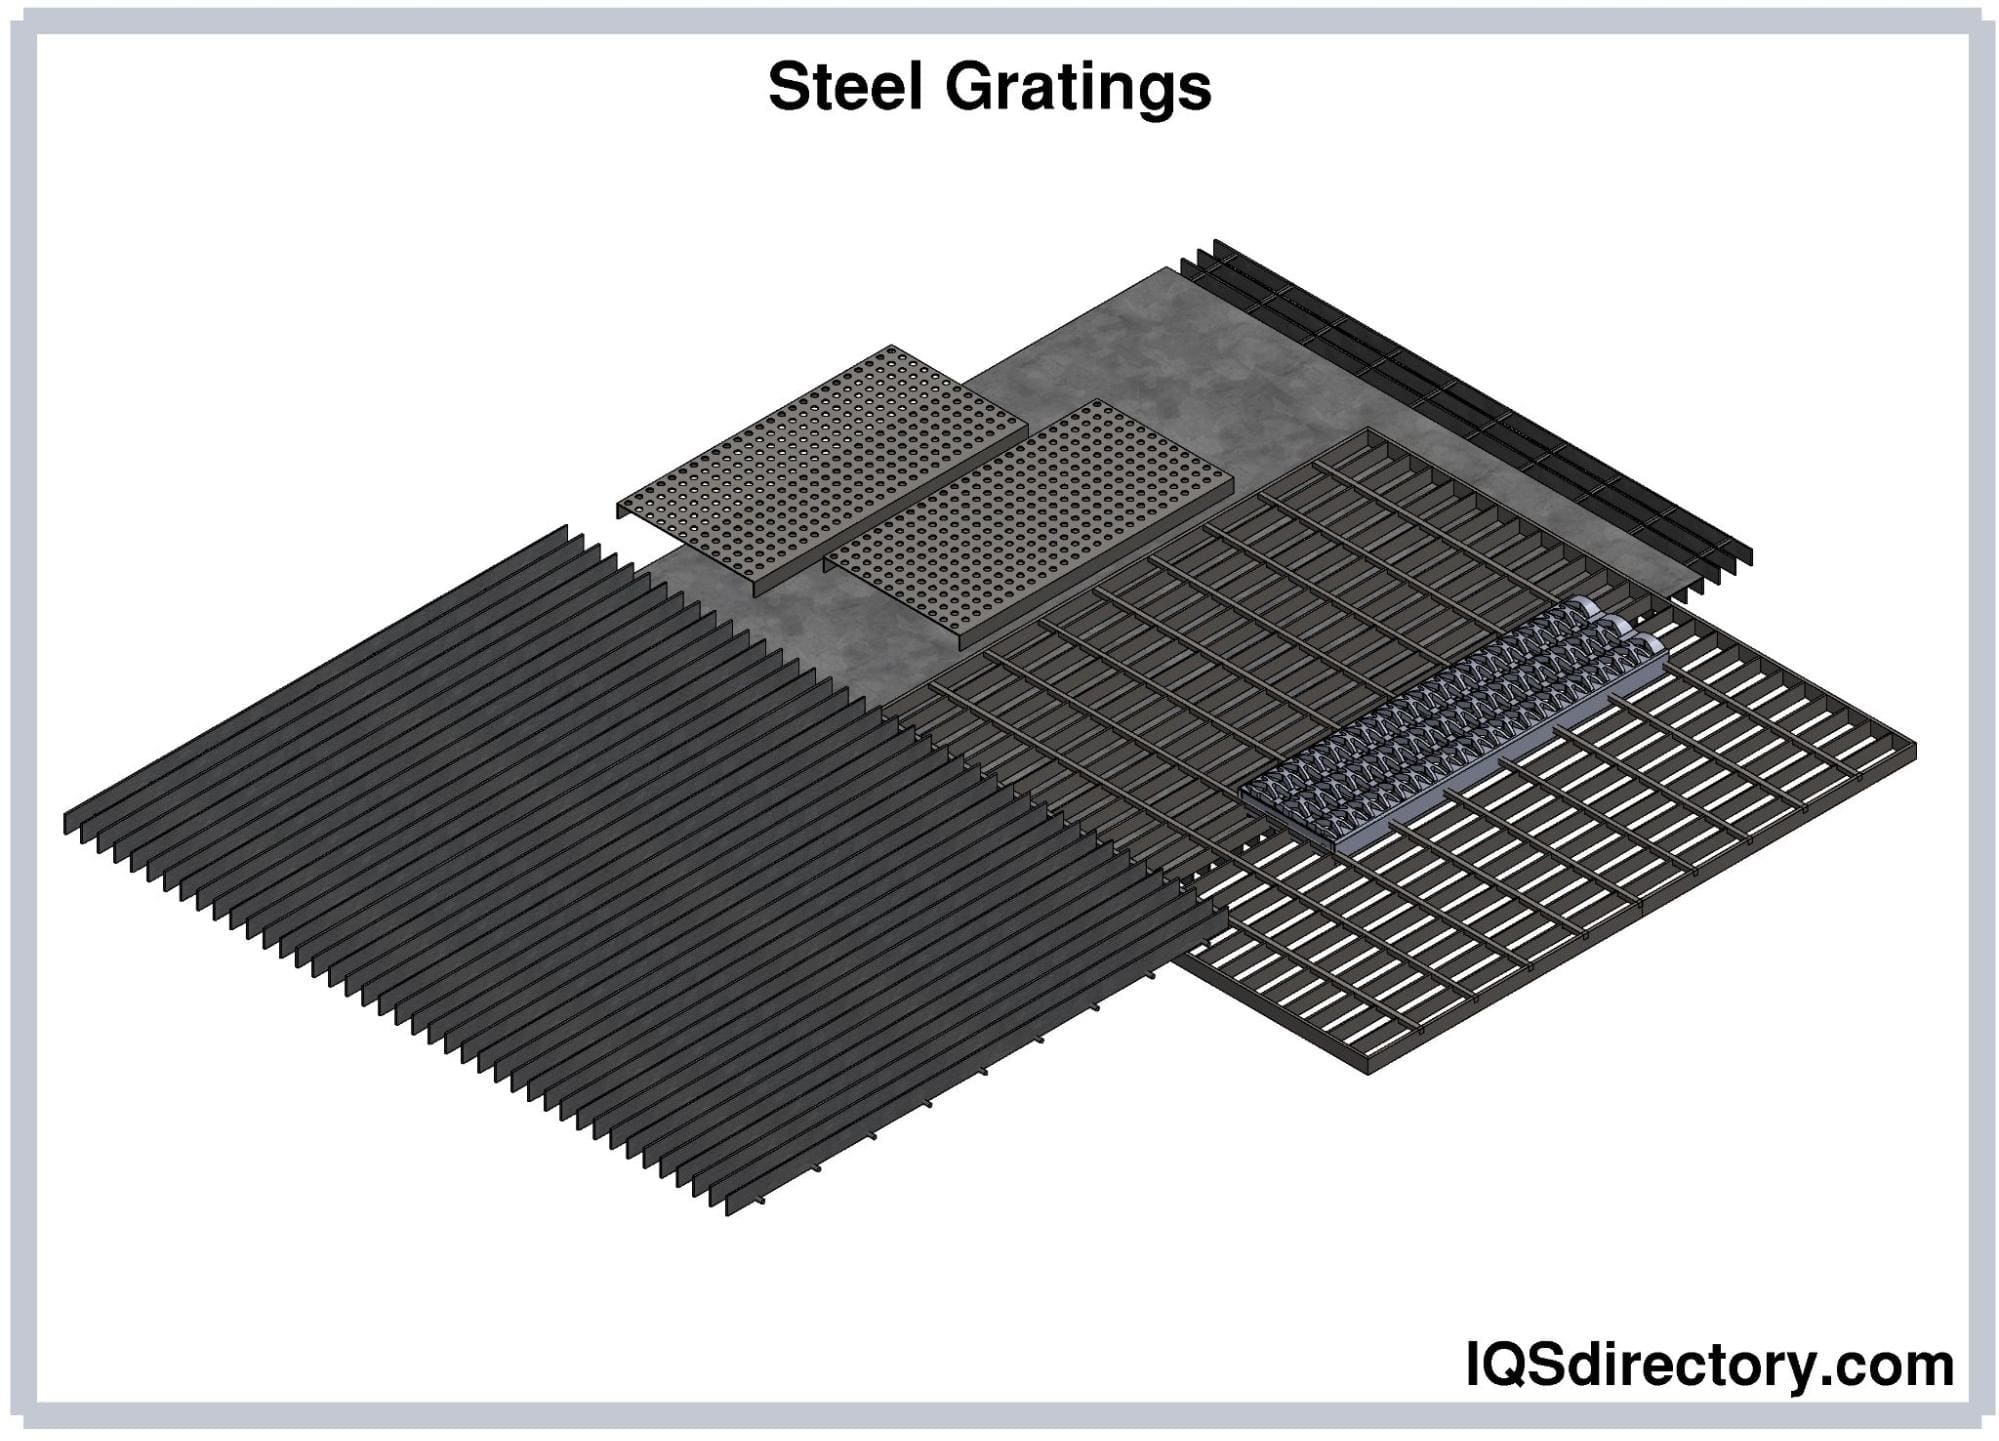 grube jord Rig mand Metal Grating: What Is It? How Is It Used? Types Of